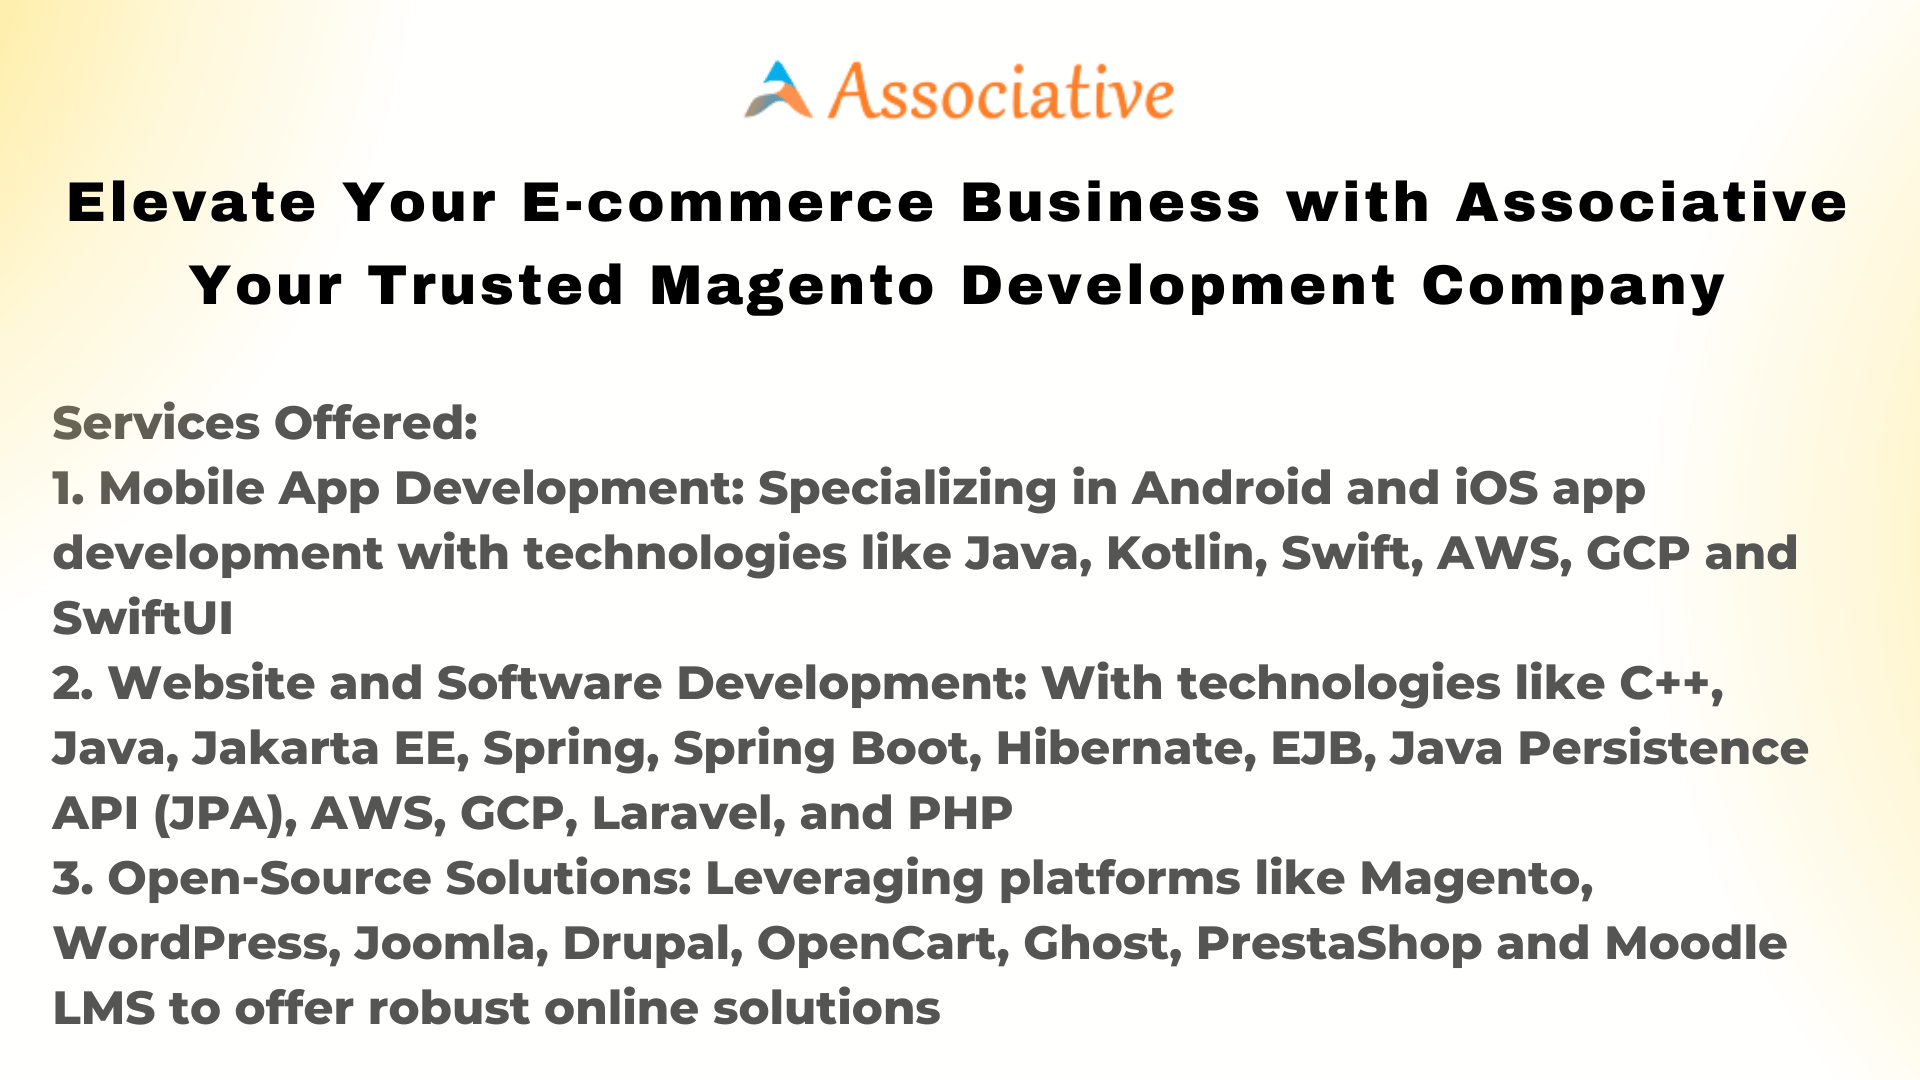 Elevate Your E-commerce Business with Associative Your Trusted Magento Development Company